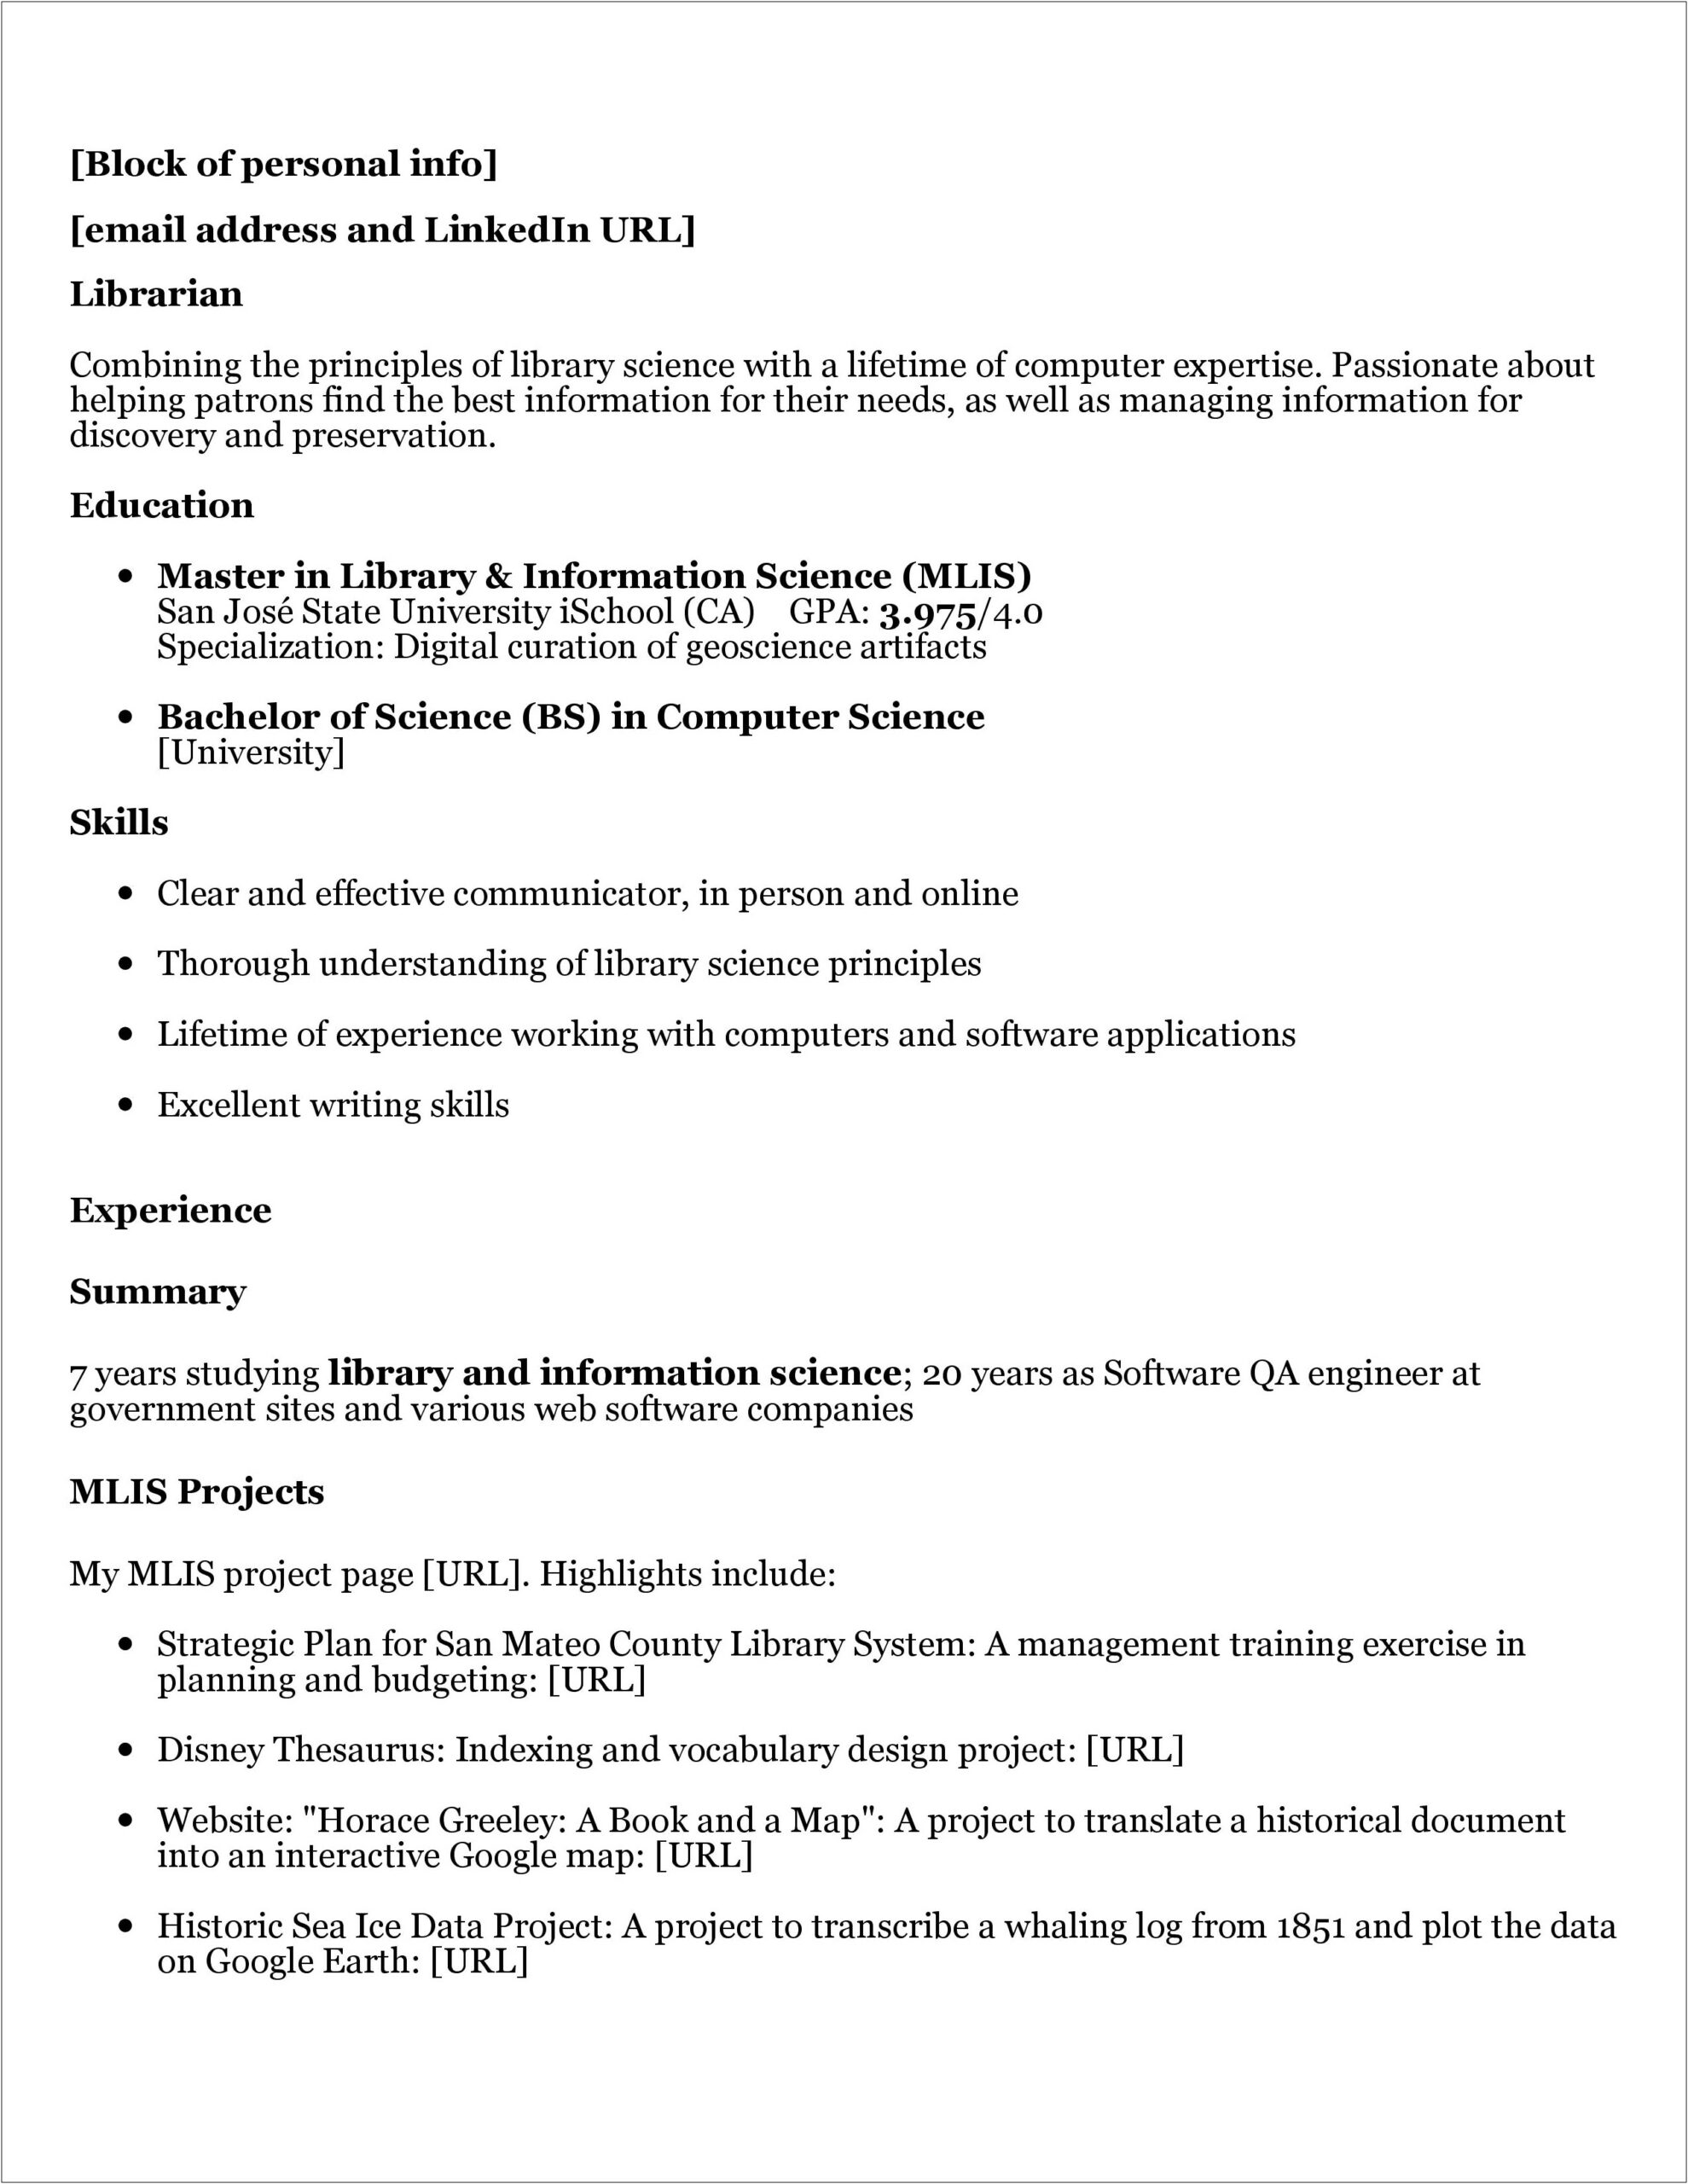 Current Job In Past Tense On Resume